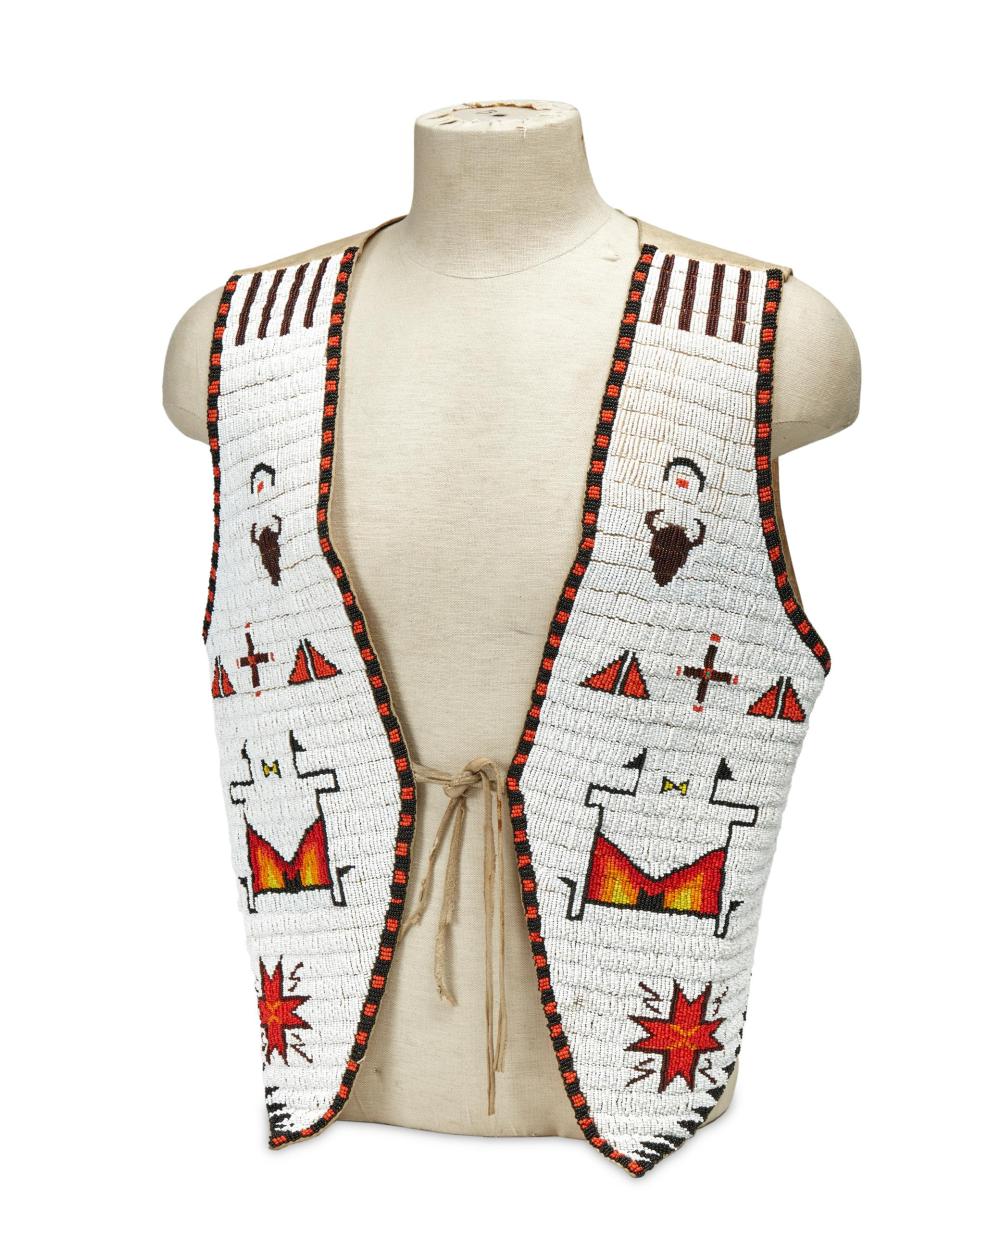 A SIOUX BEADED HIDE VEST, BY ARCHIE